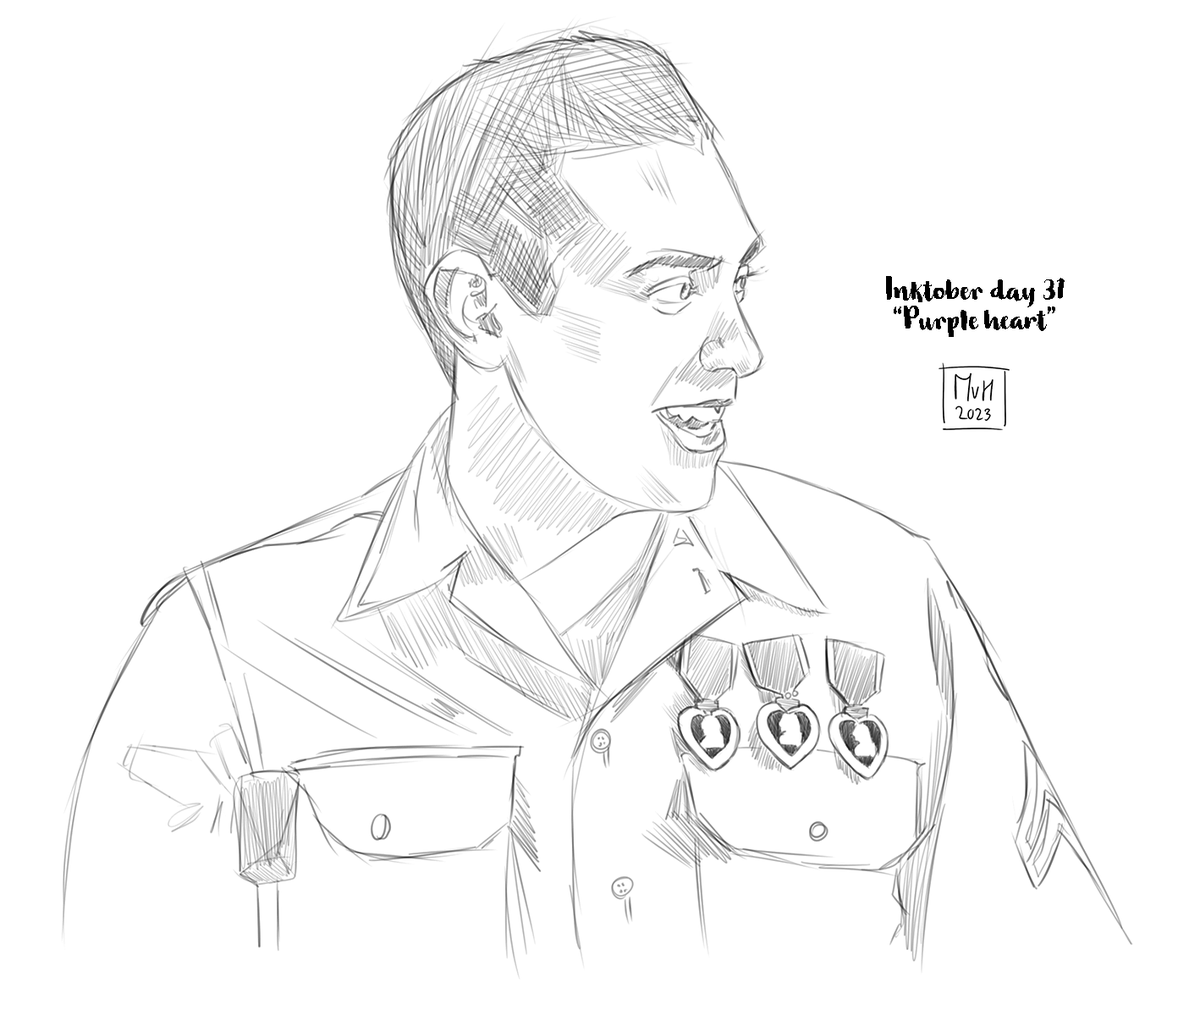 BoB inktober day 31. Purple heart. I know I'm a day late, but to finish off this inktober, here's Smokey Gordon with 3 purple hearts. Thanks to everyone who's been following along. Which drawing has been your favourite? #inktober #inktober2023